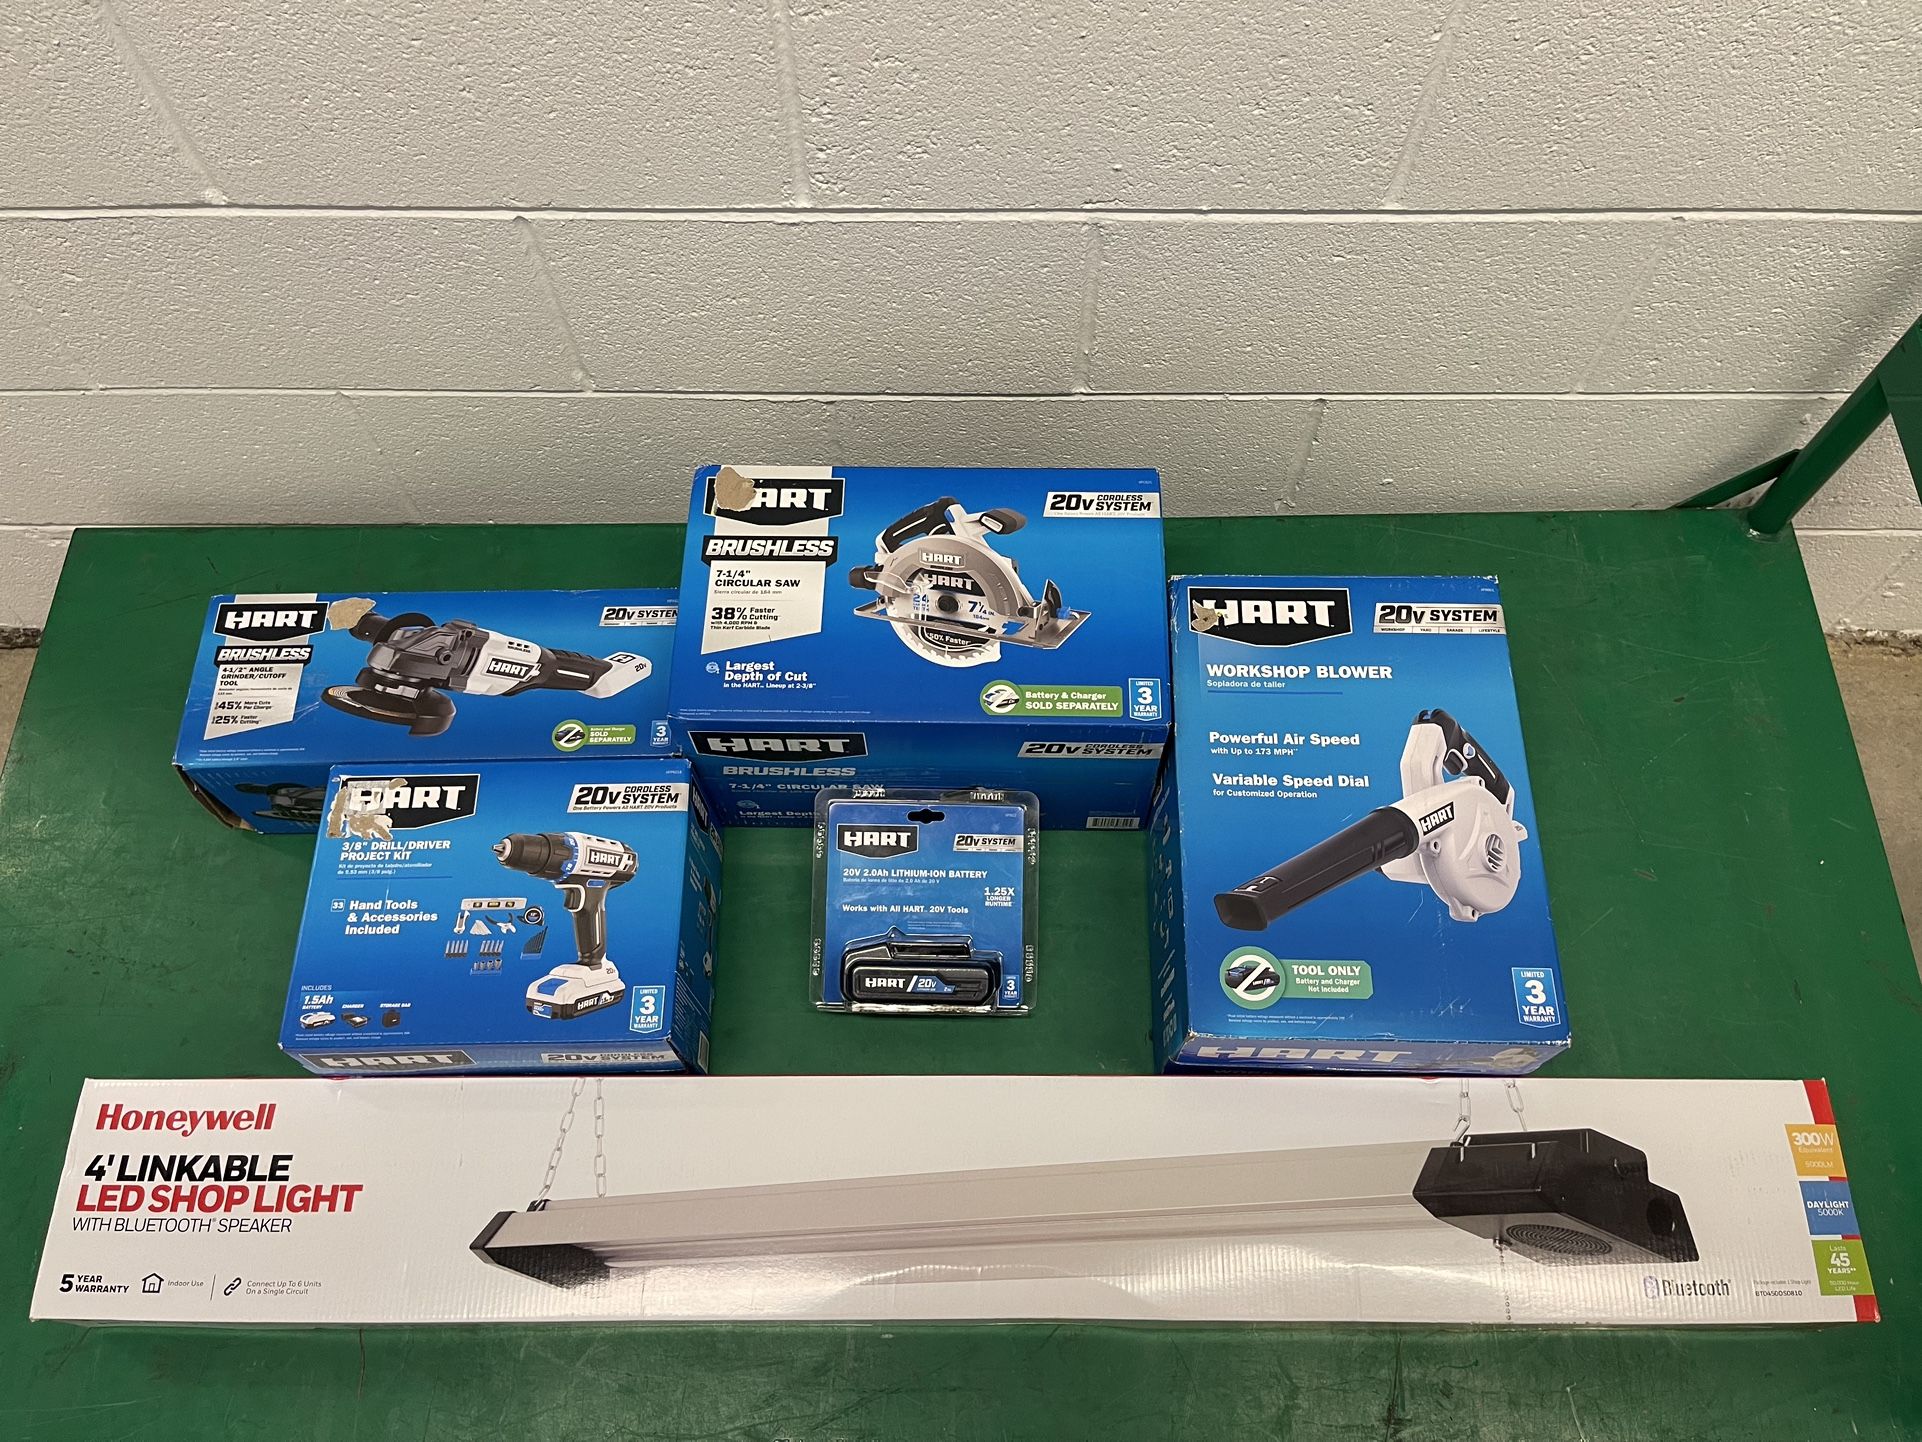 LED SHOP LIGHT WITH BUILT IN BLUETOOTH SPEAKER, HART TOOLS, & ACCESSORIES (ALL BRAND NEW IN BOX)